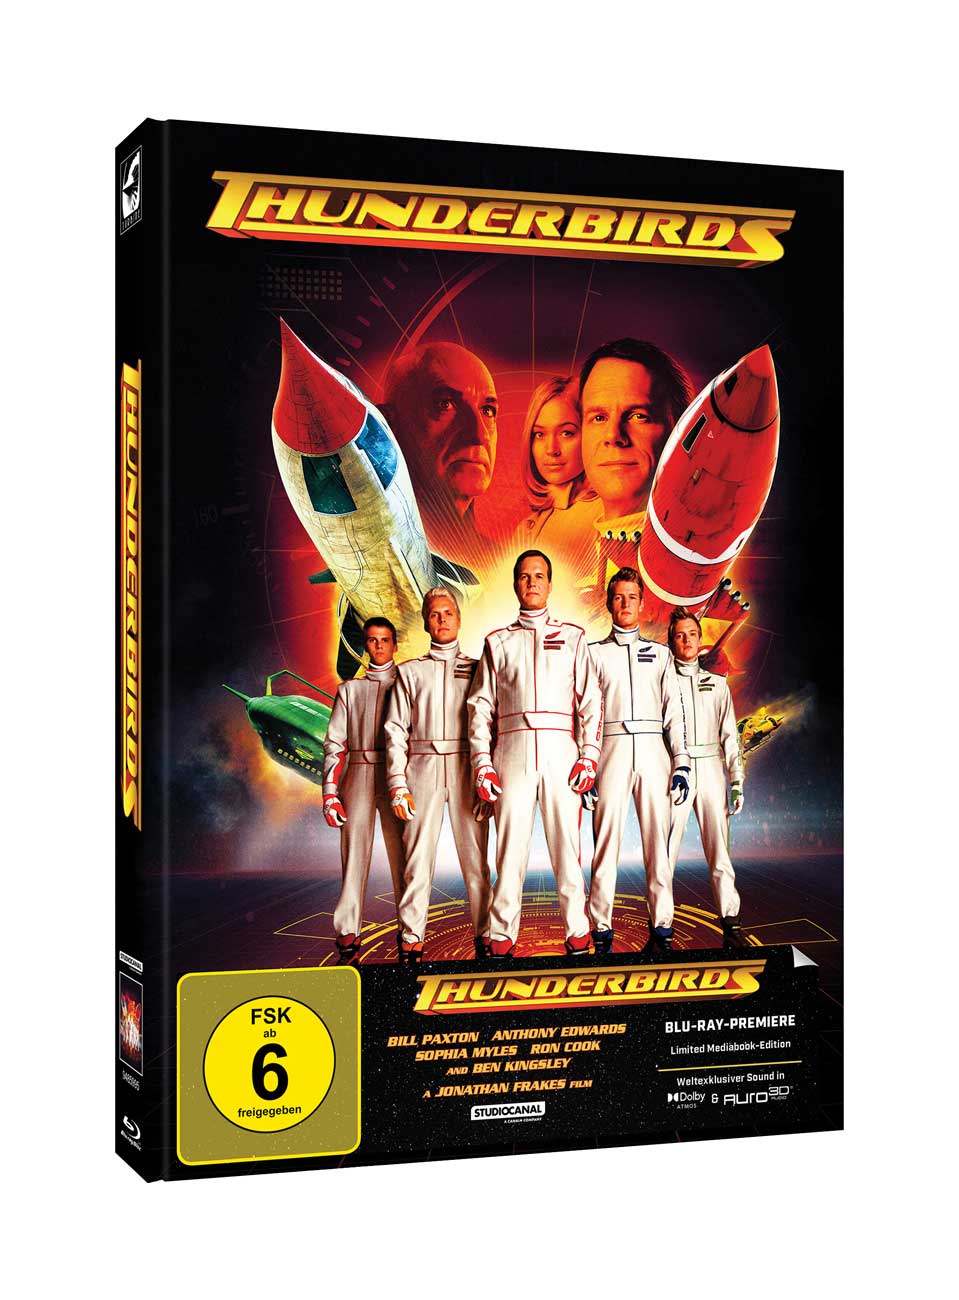 Thunderbirds: The Complete Series Blu-ray Import - データ用メディア